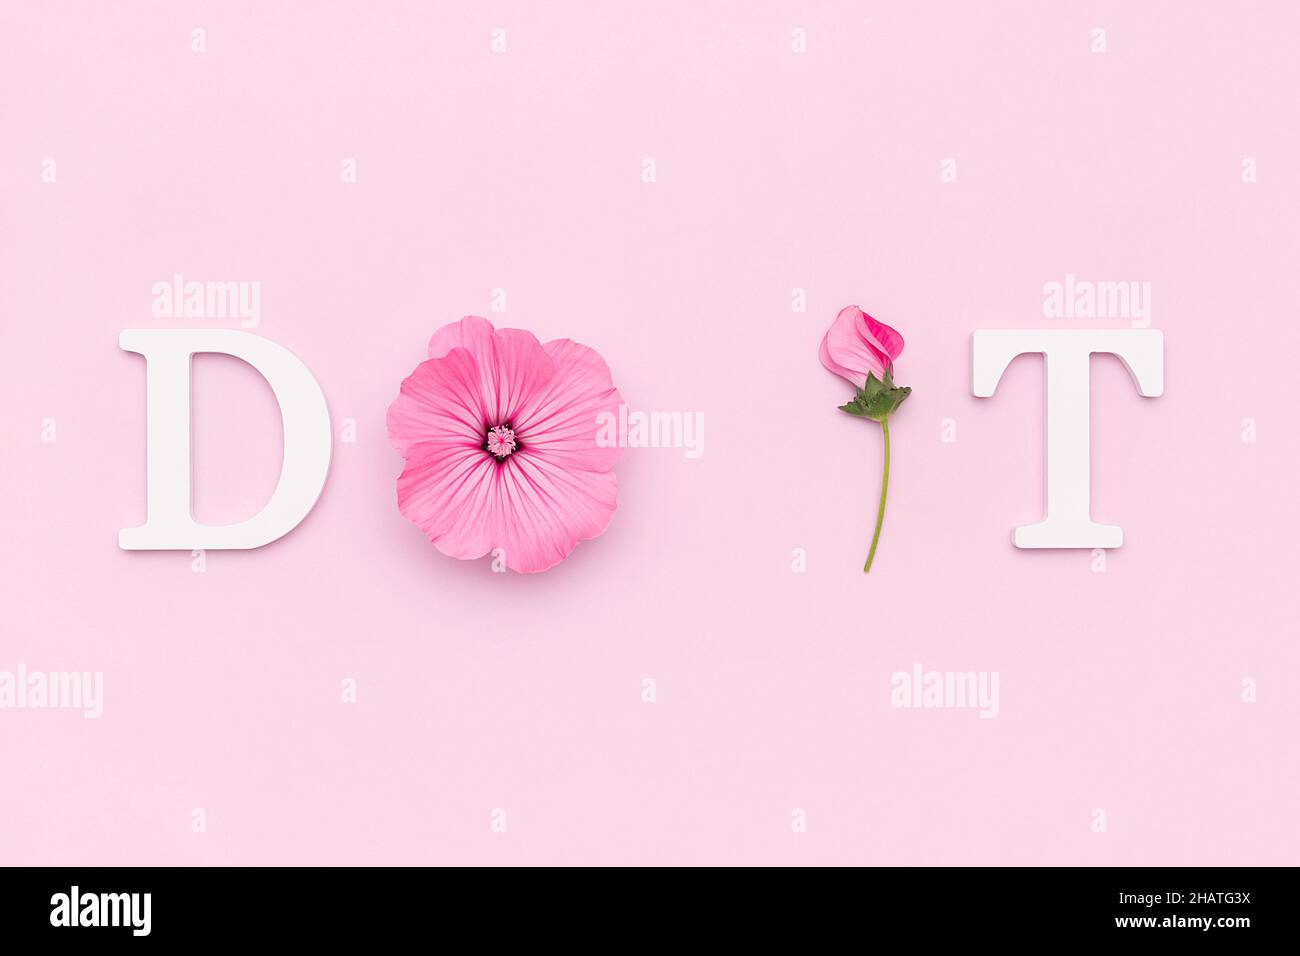 Do it. Motivational quote from white letters and beauty natural flowers on pink background. Creative concept inspirational quote of the day. Stock Photo